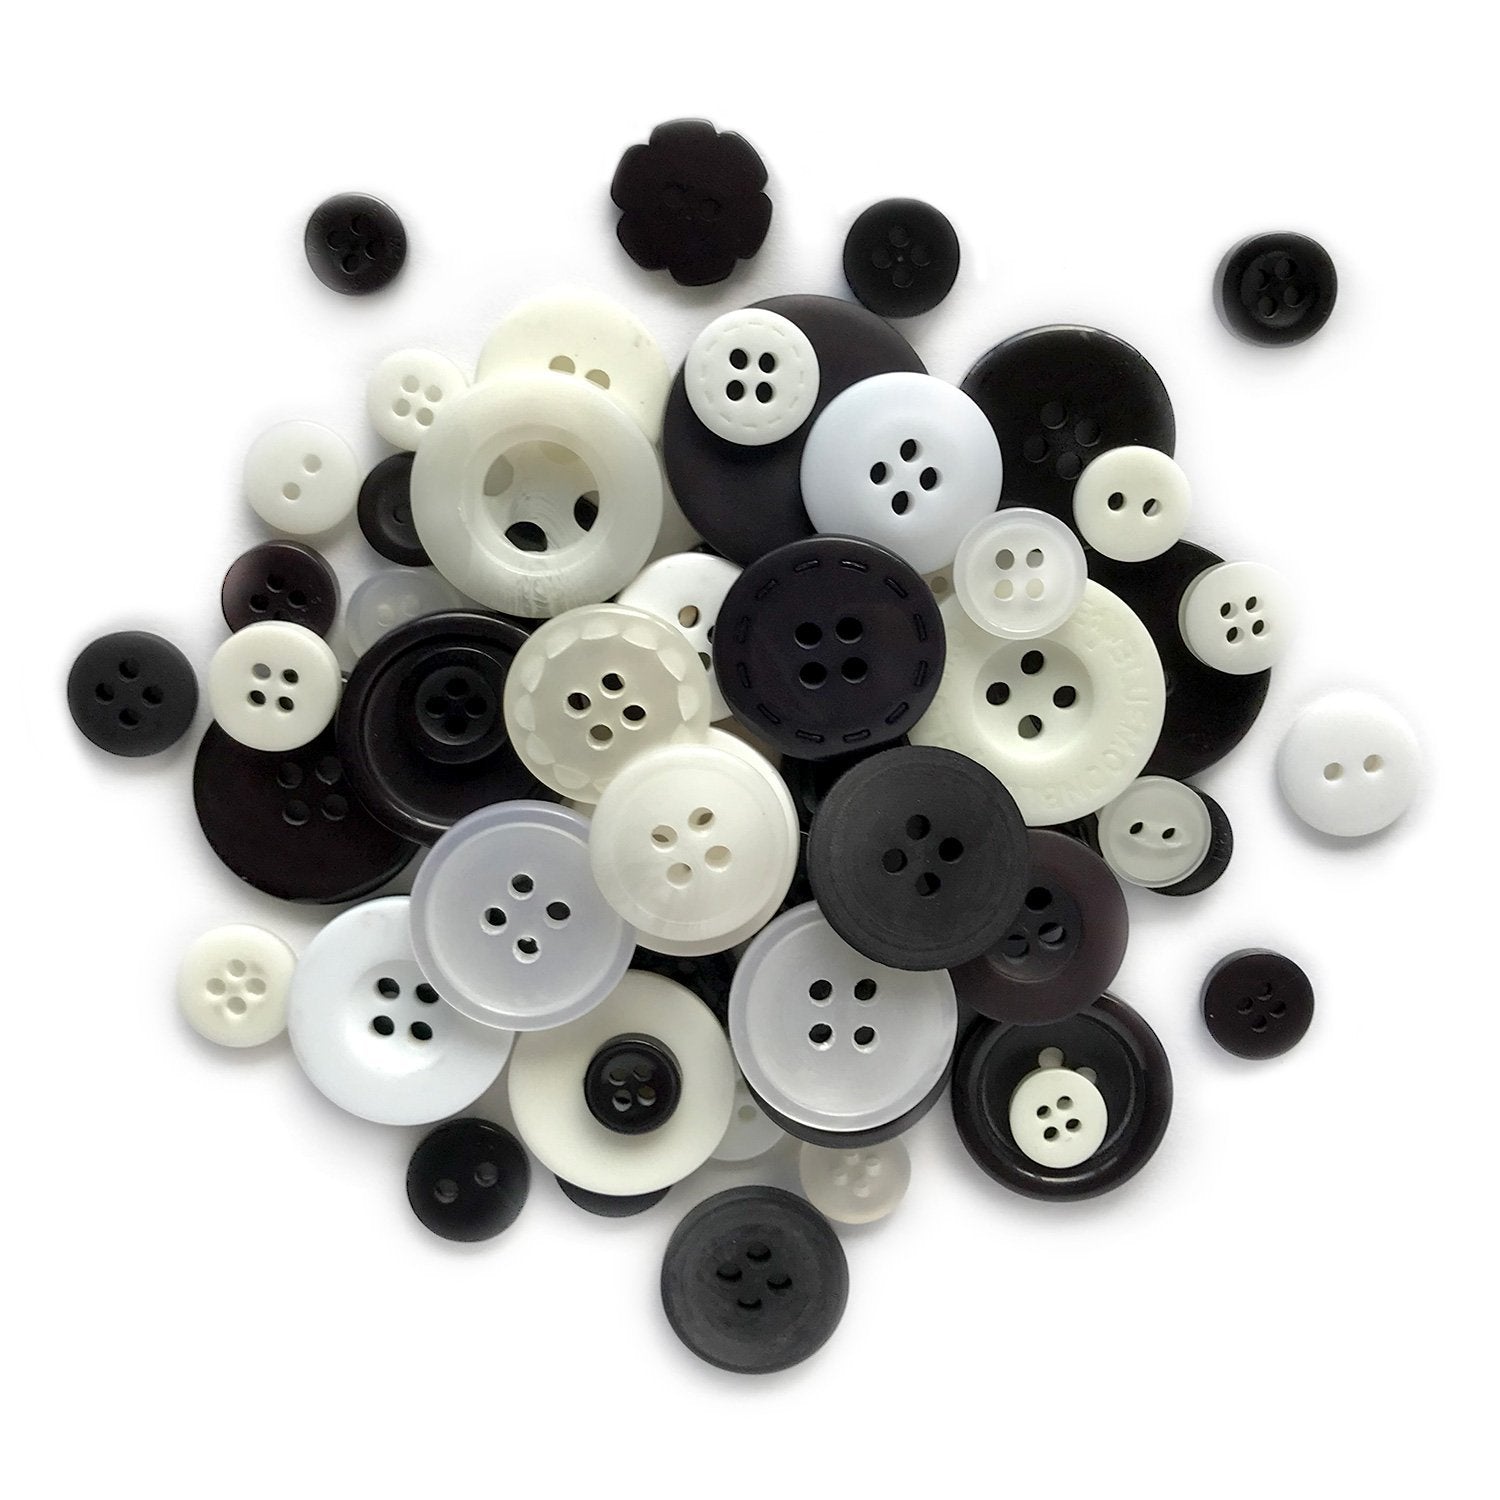 Create A Craft Assorted White Buttons Sewing Crafts New In Package 4 Oz